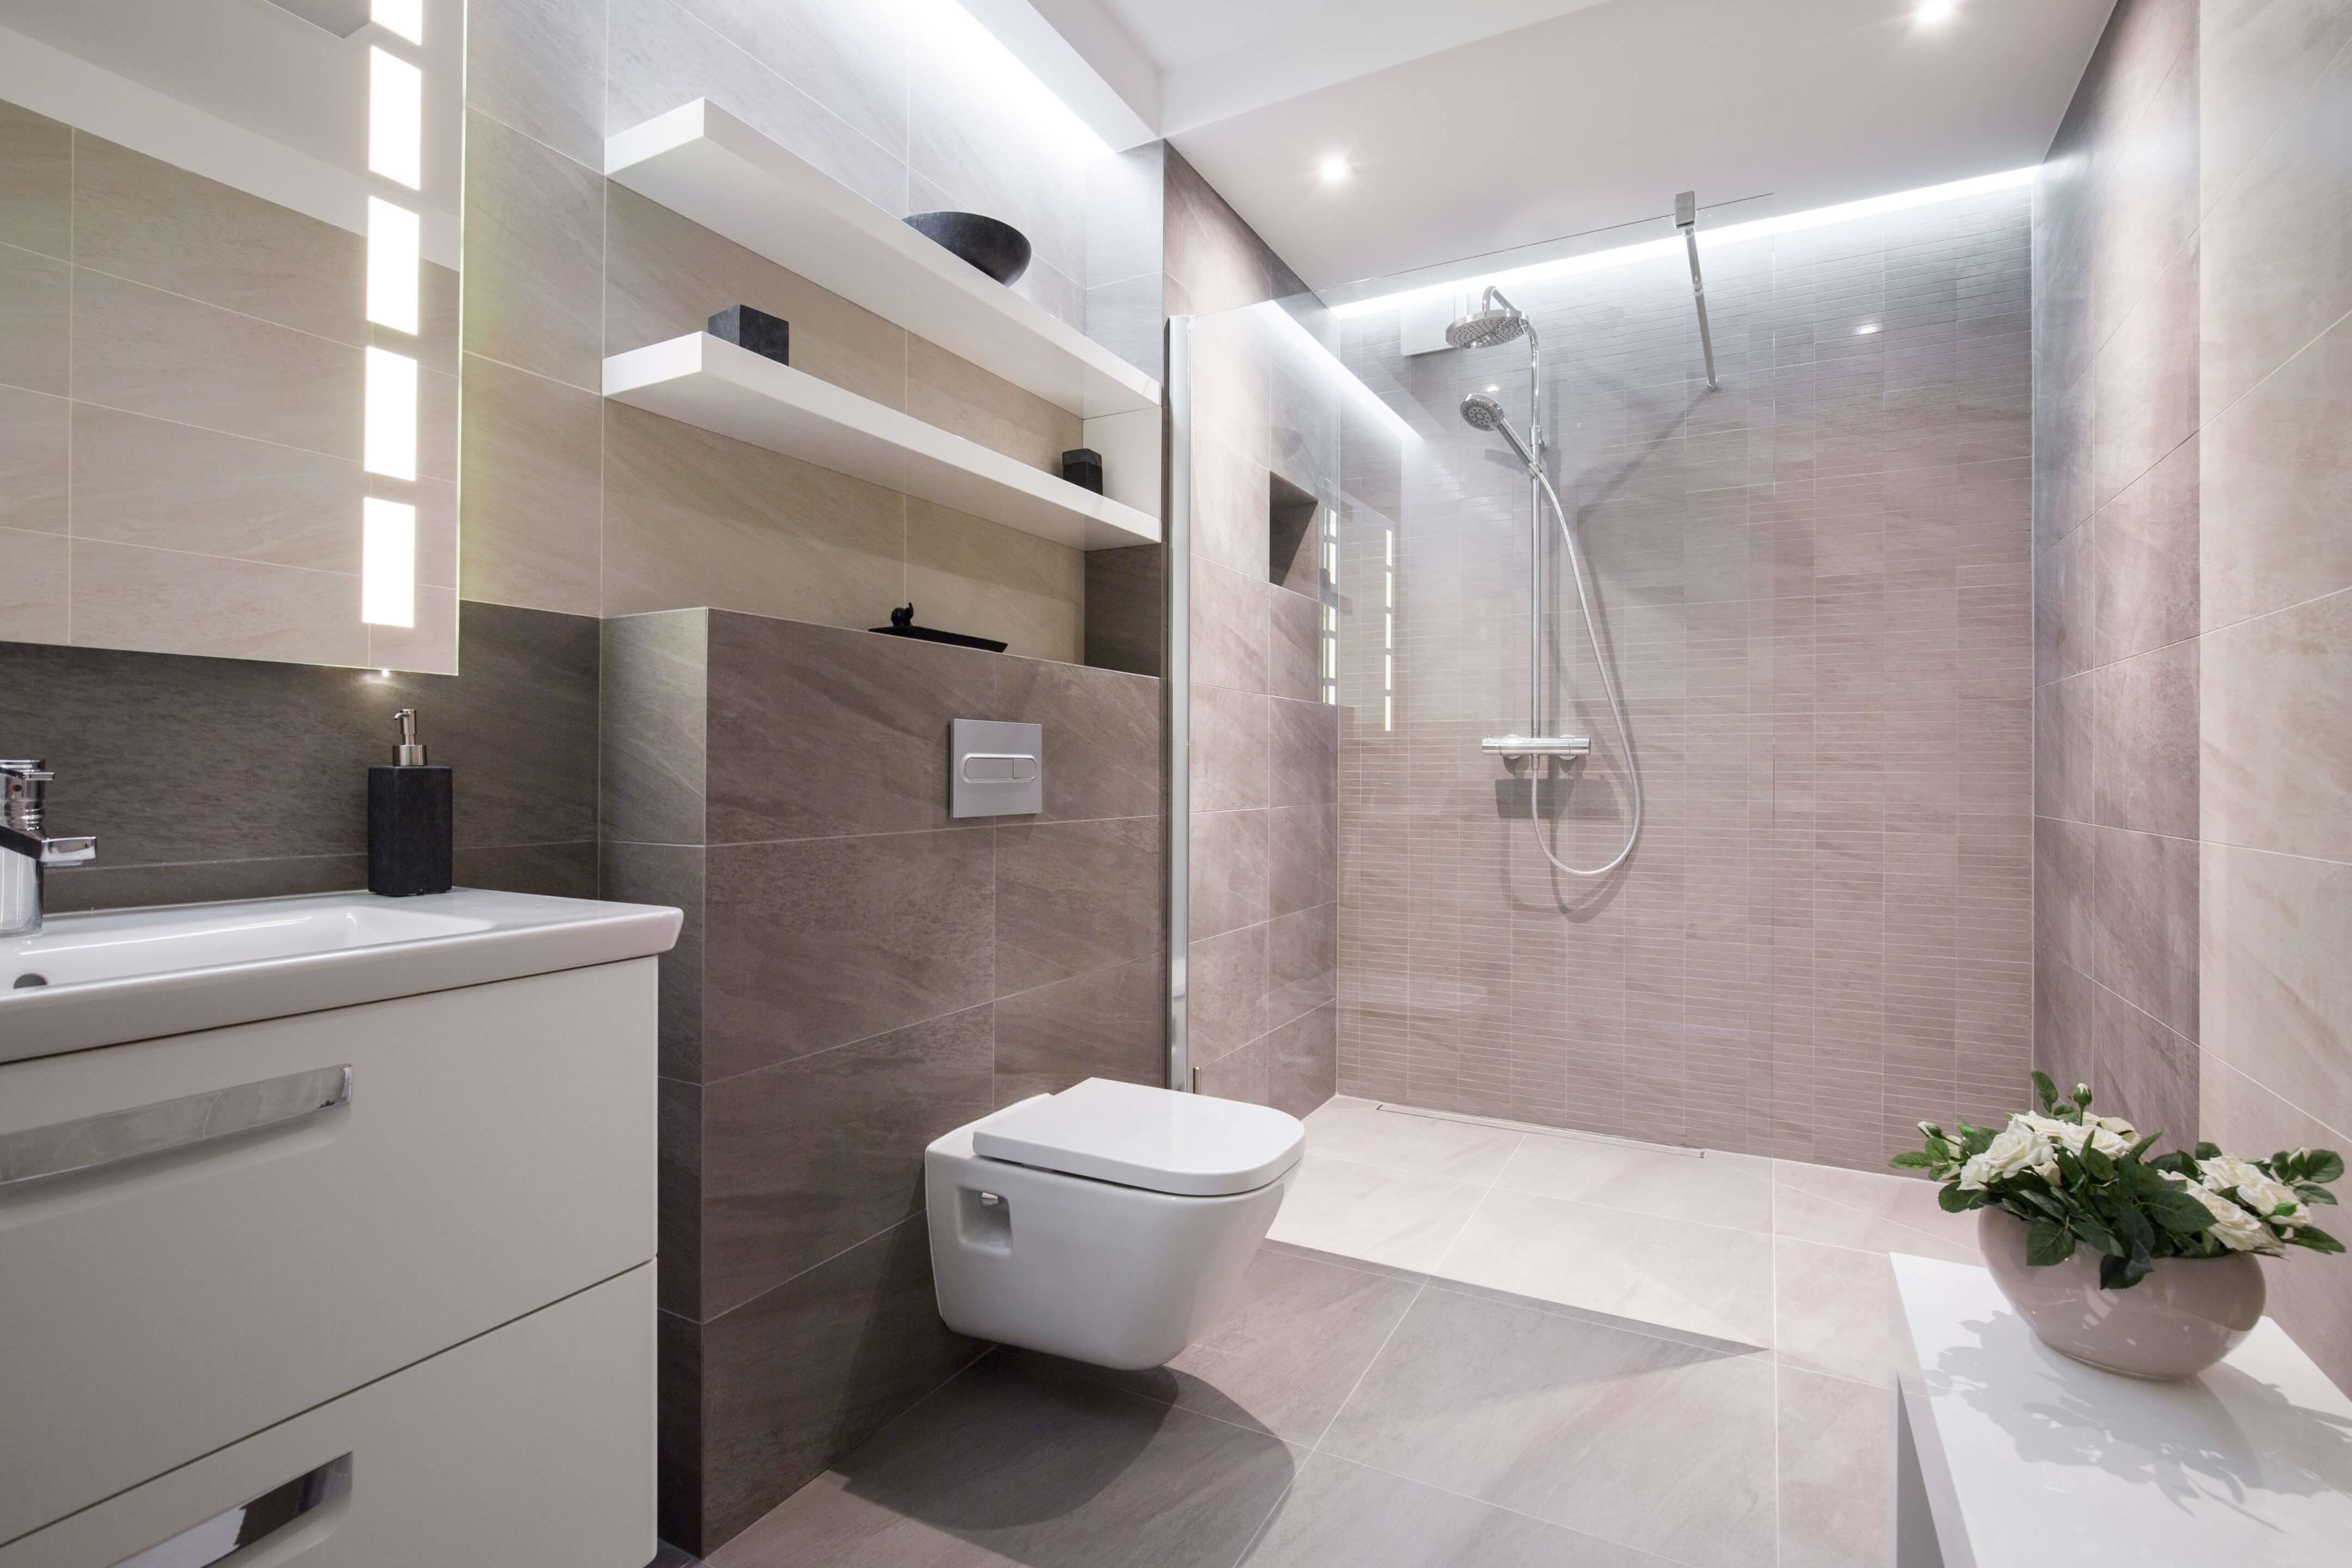 local bathroom fitters shower installations battersea